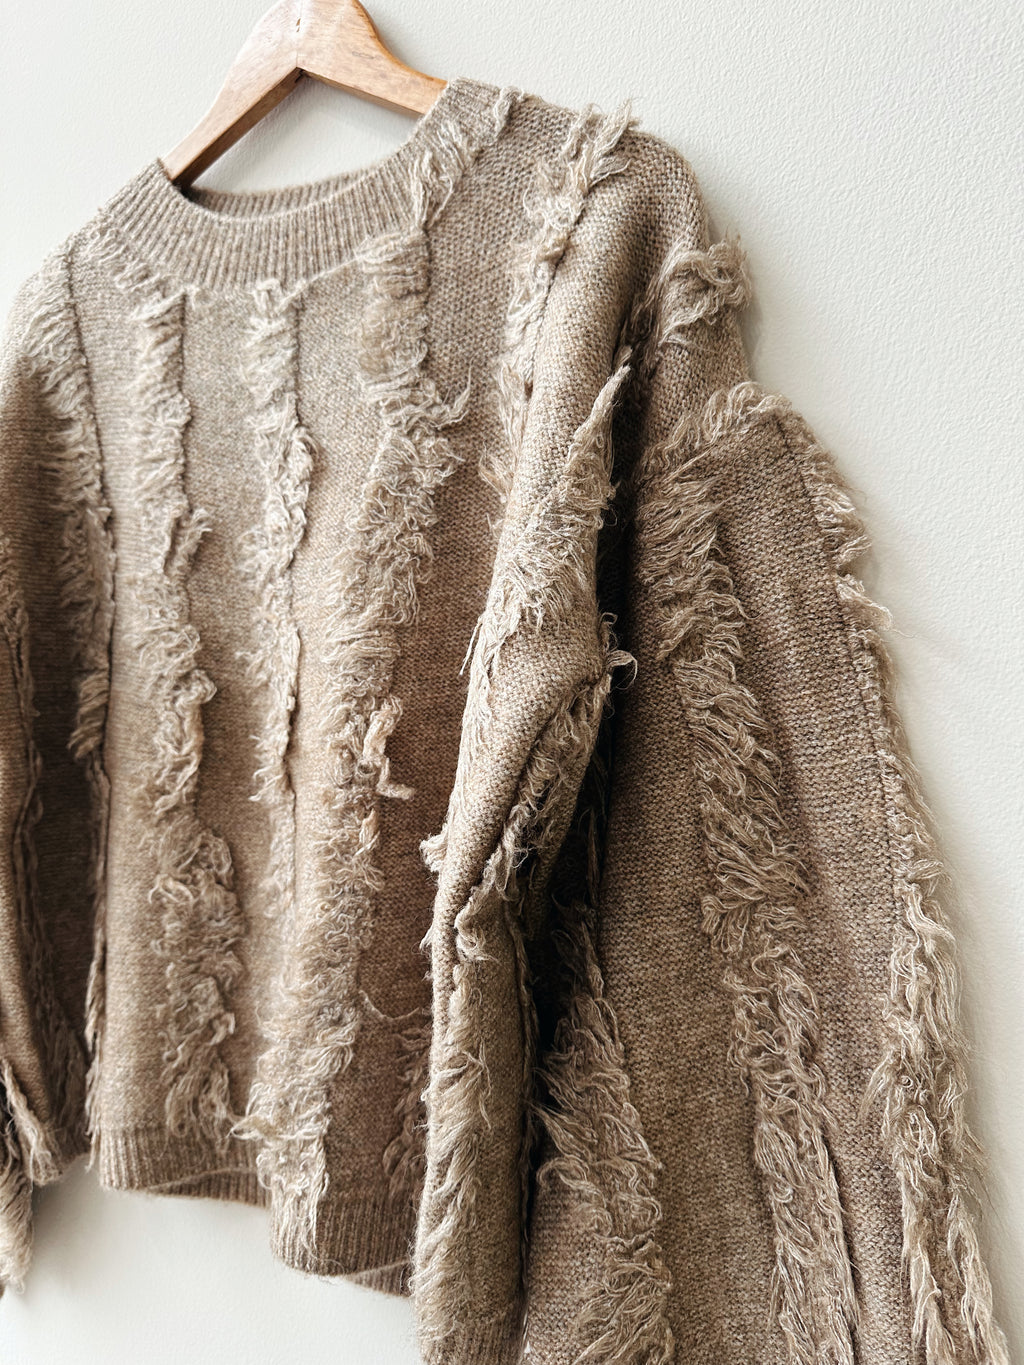 Murre Fringe Sweater in Taupe